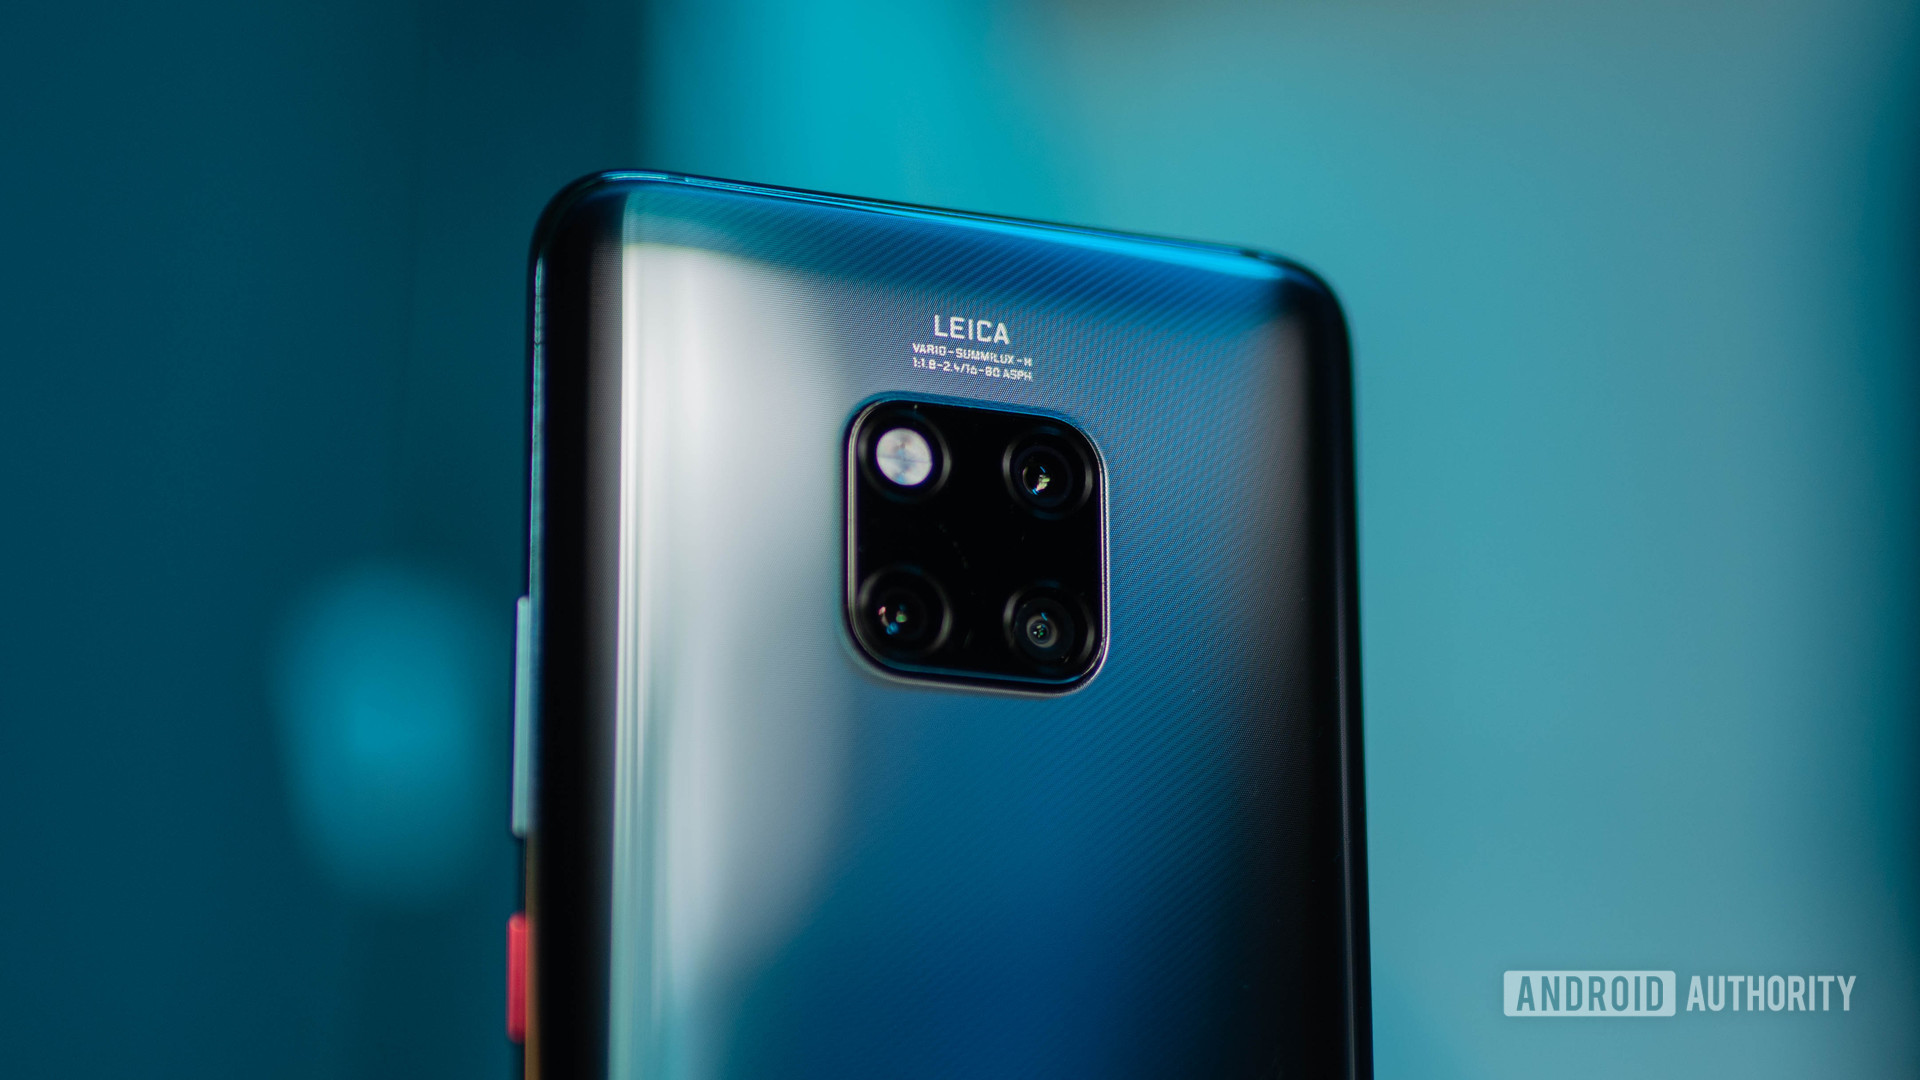 My old phone that's better than some new flagships — the Huawei Mate 20 Pro rear view showing the camera housing